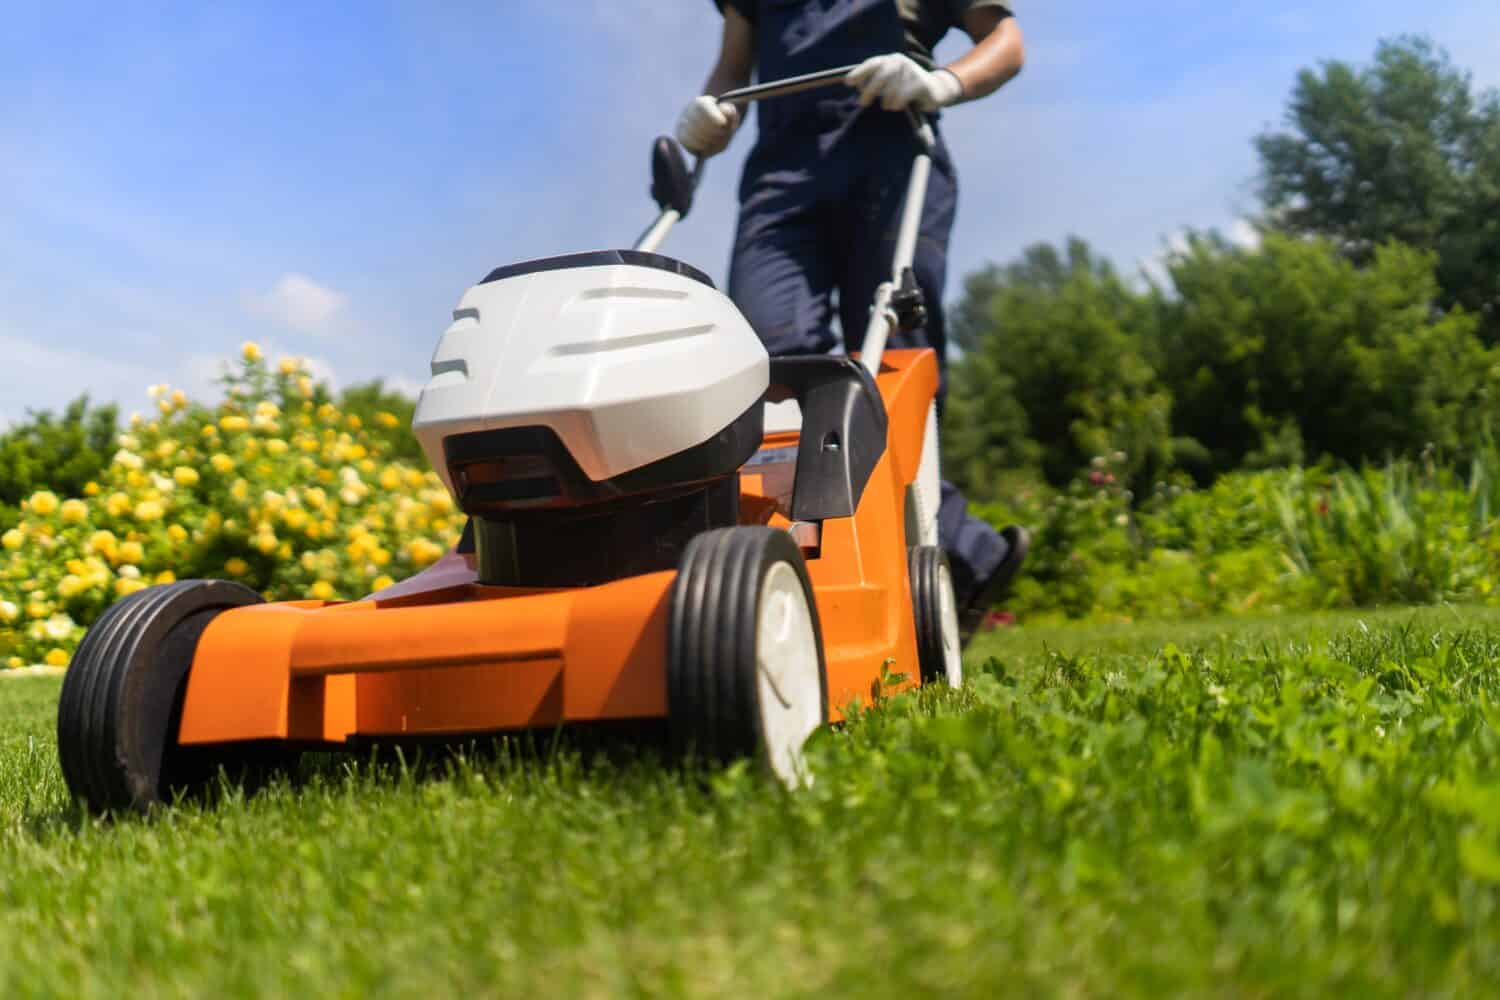 A young man is mowing a lawn with a lawn mower in his beautiful green floral summer garden. A professional gardener with a lawnmower cares for the grass in the backyard.